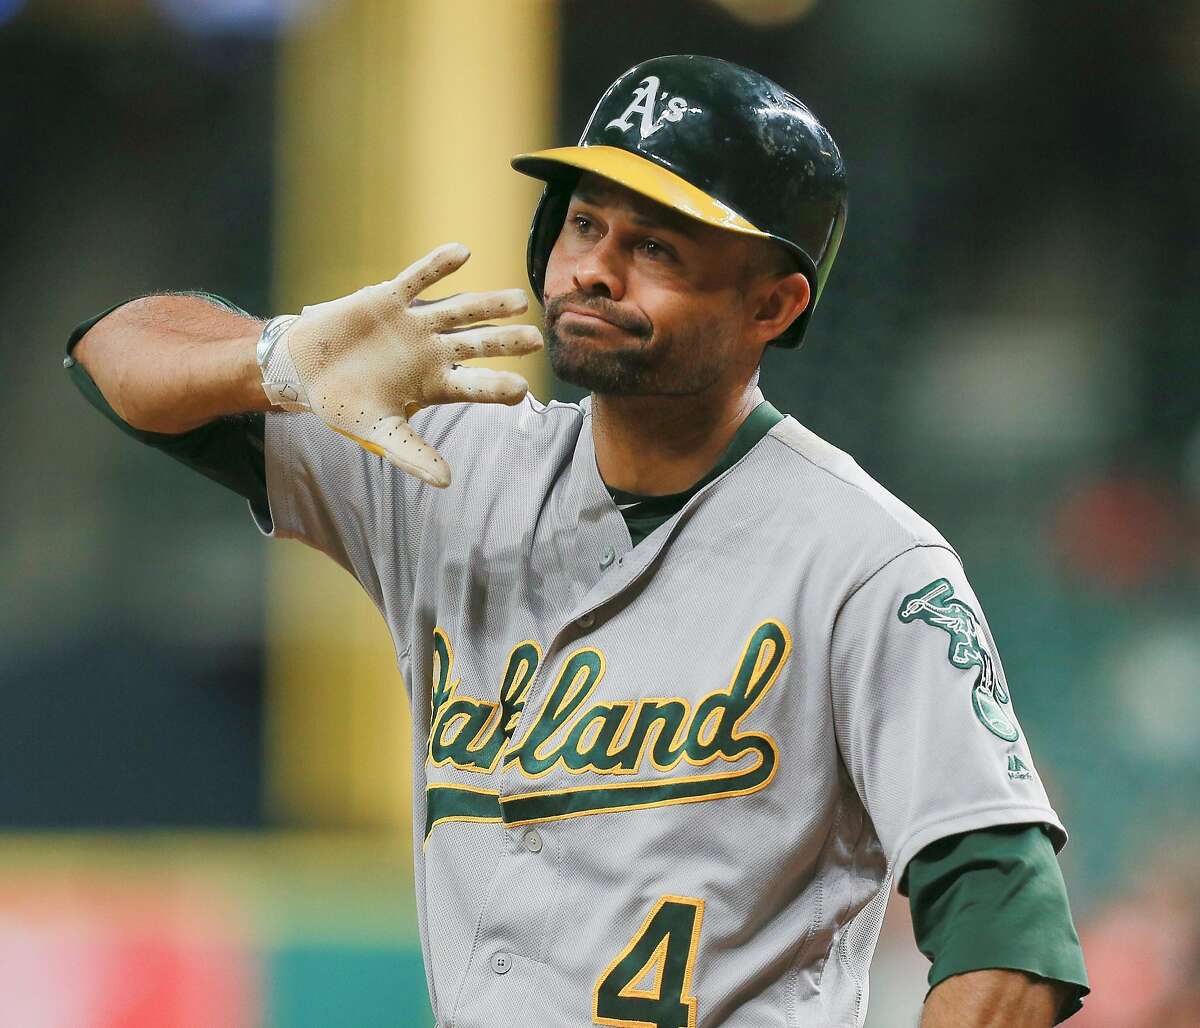 HOUSTON, TX - AUGUST 29: Coco Crisp #4 of the Oakland Athletics disagrees with the third base umpires decision that he didn't check his swing for strike three in the first inning against the Houston Astros at Minute Maid Park on August 29, 2016 in Houston, Texas. (Photo by Bob Levey/Getty Images)